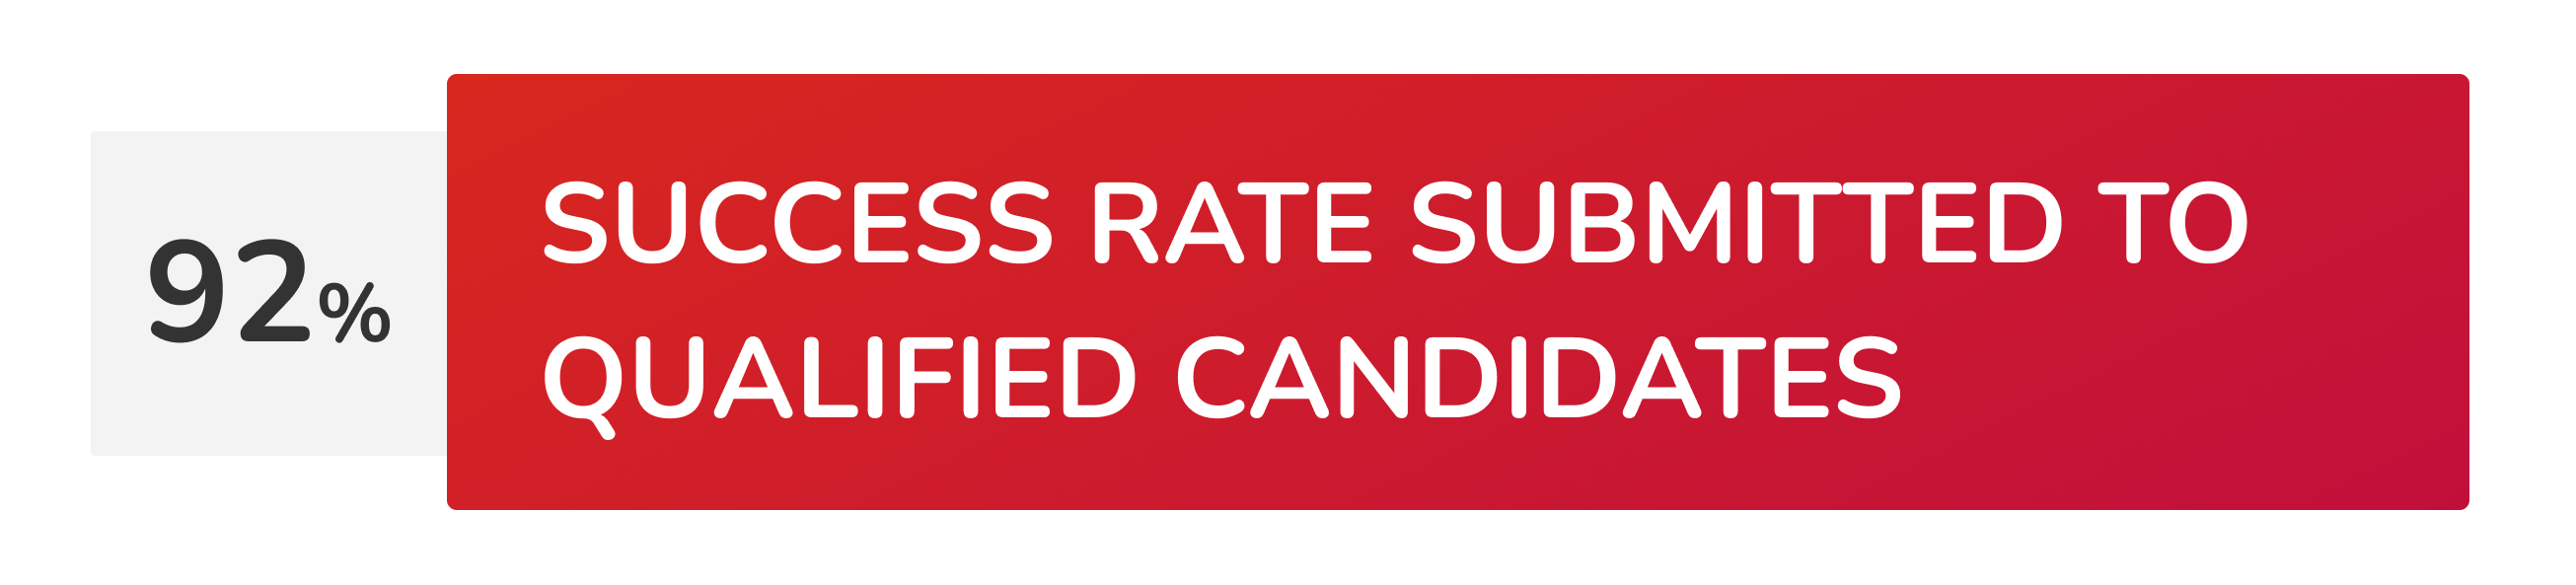 92% Success rate Submitted to qualified candidates